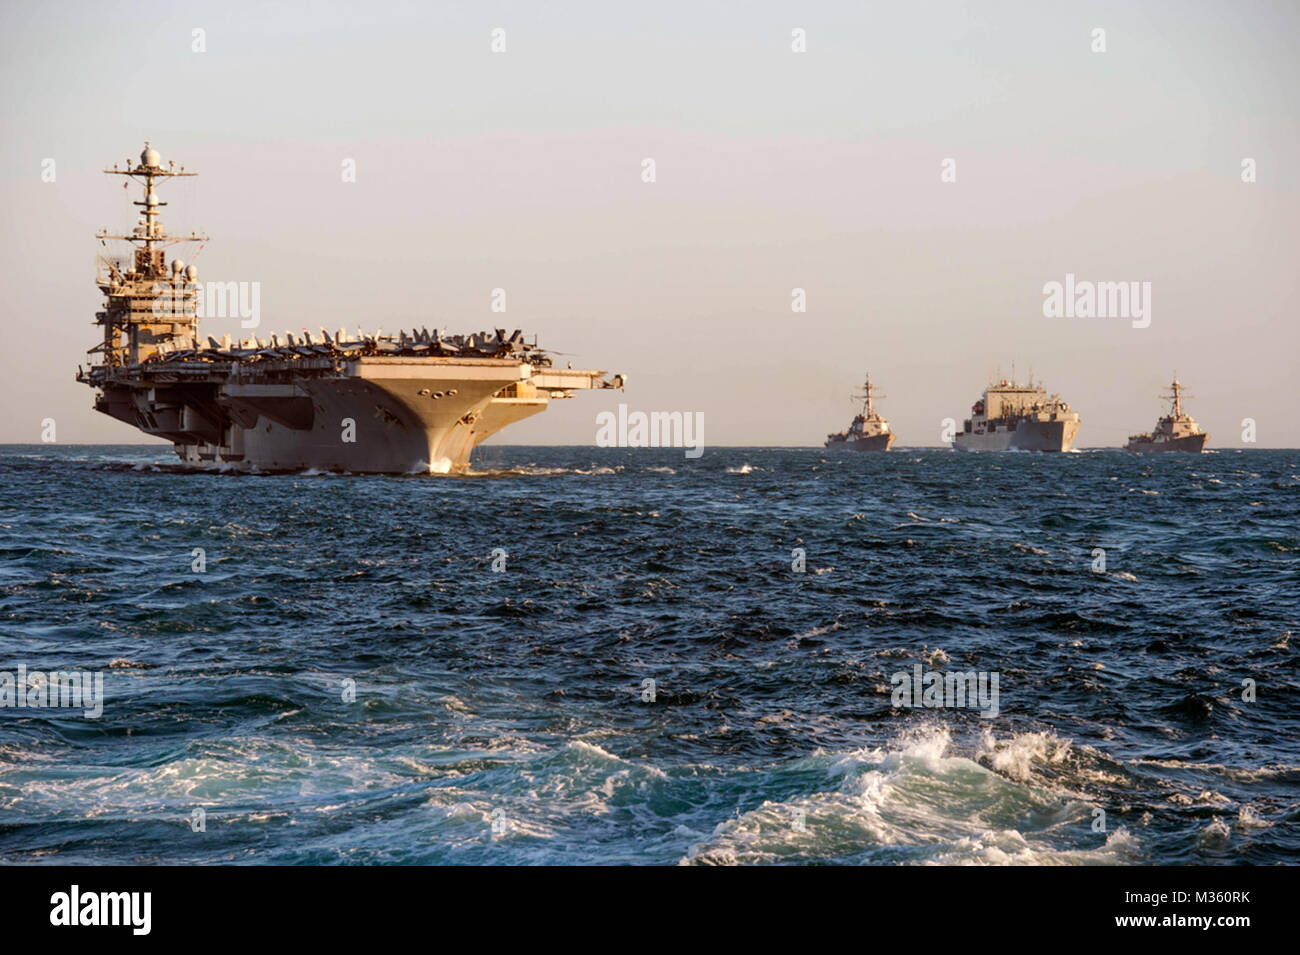 150719-N-XM324-108 TIMOR SEA (July 19, 2015) (from left to right) Nimitz-class aircraft carrier USS George Washington (CVN 73), Arleigh Burke-class guided-missile destroyer USS Mustin (DDG 89), dry cargo ship USNS Washington Chambers (T-AKE 11), and Arleigh Burke-class guided-missile destroyer USS Chafee (DDG 90) conduct a replenishment at sea. (U.S. Navy photo by Mass Communication Specialist 3rd Class Patrick Dionne/Released) USS George Washington Conducts Replenishment at Sea by #PACOM Stock Photo